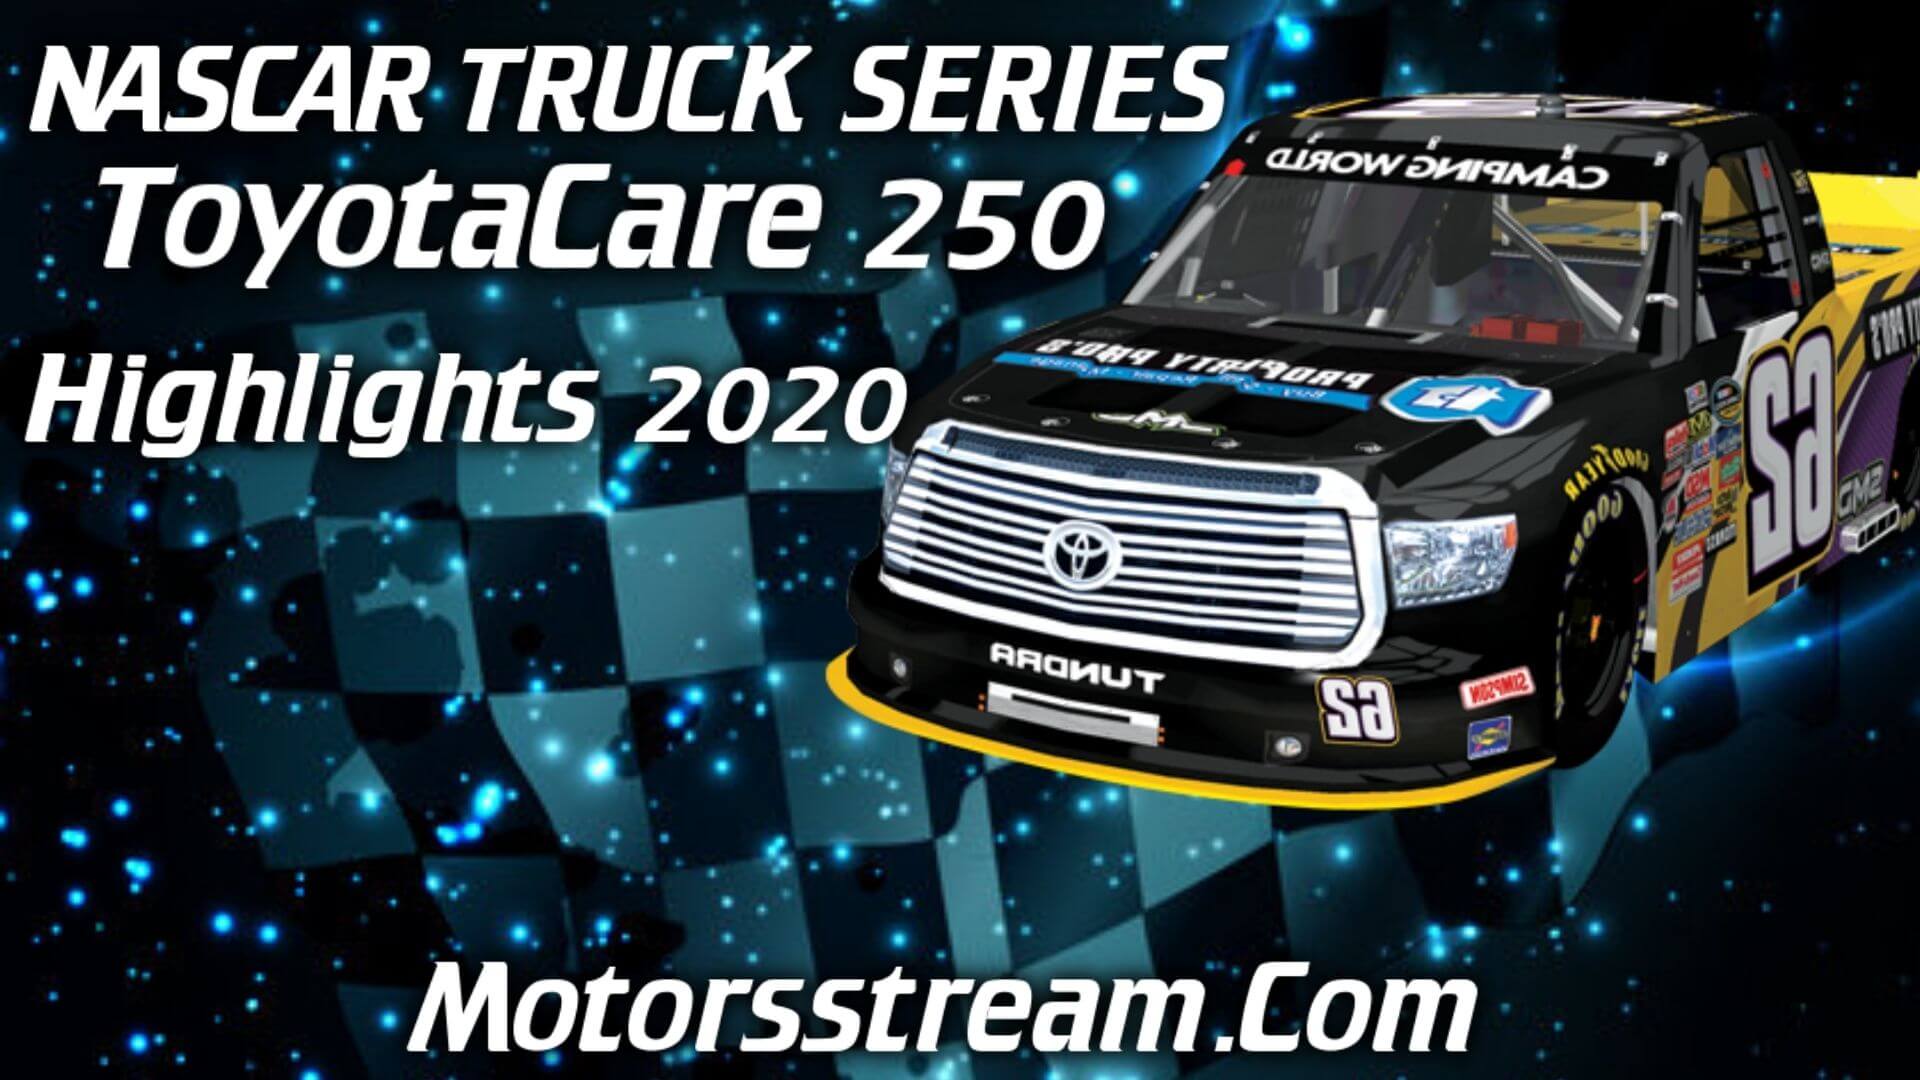 ToyotaCare 250 Highlights 2020 NASCAR Truck Series